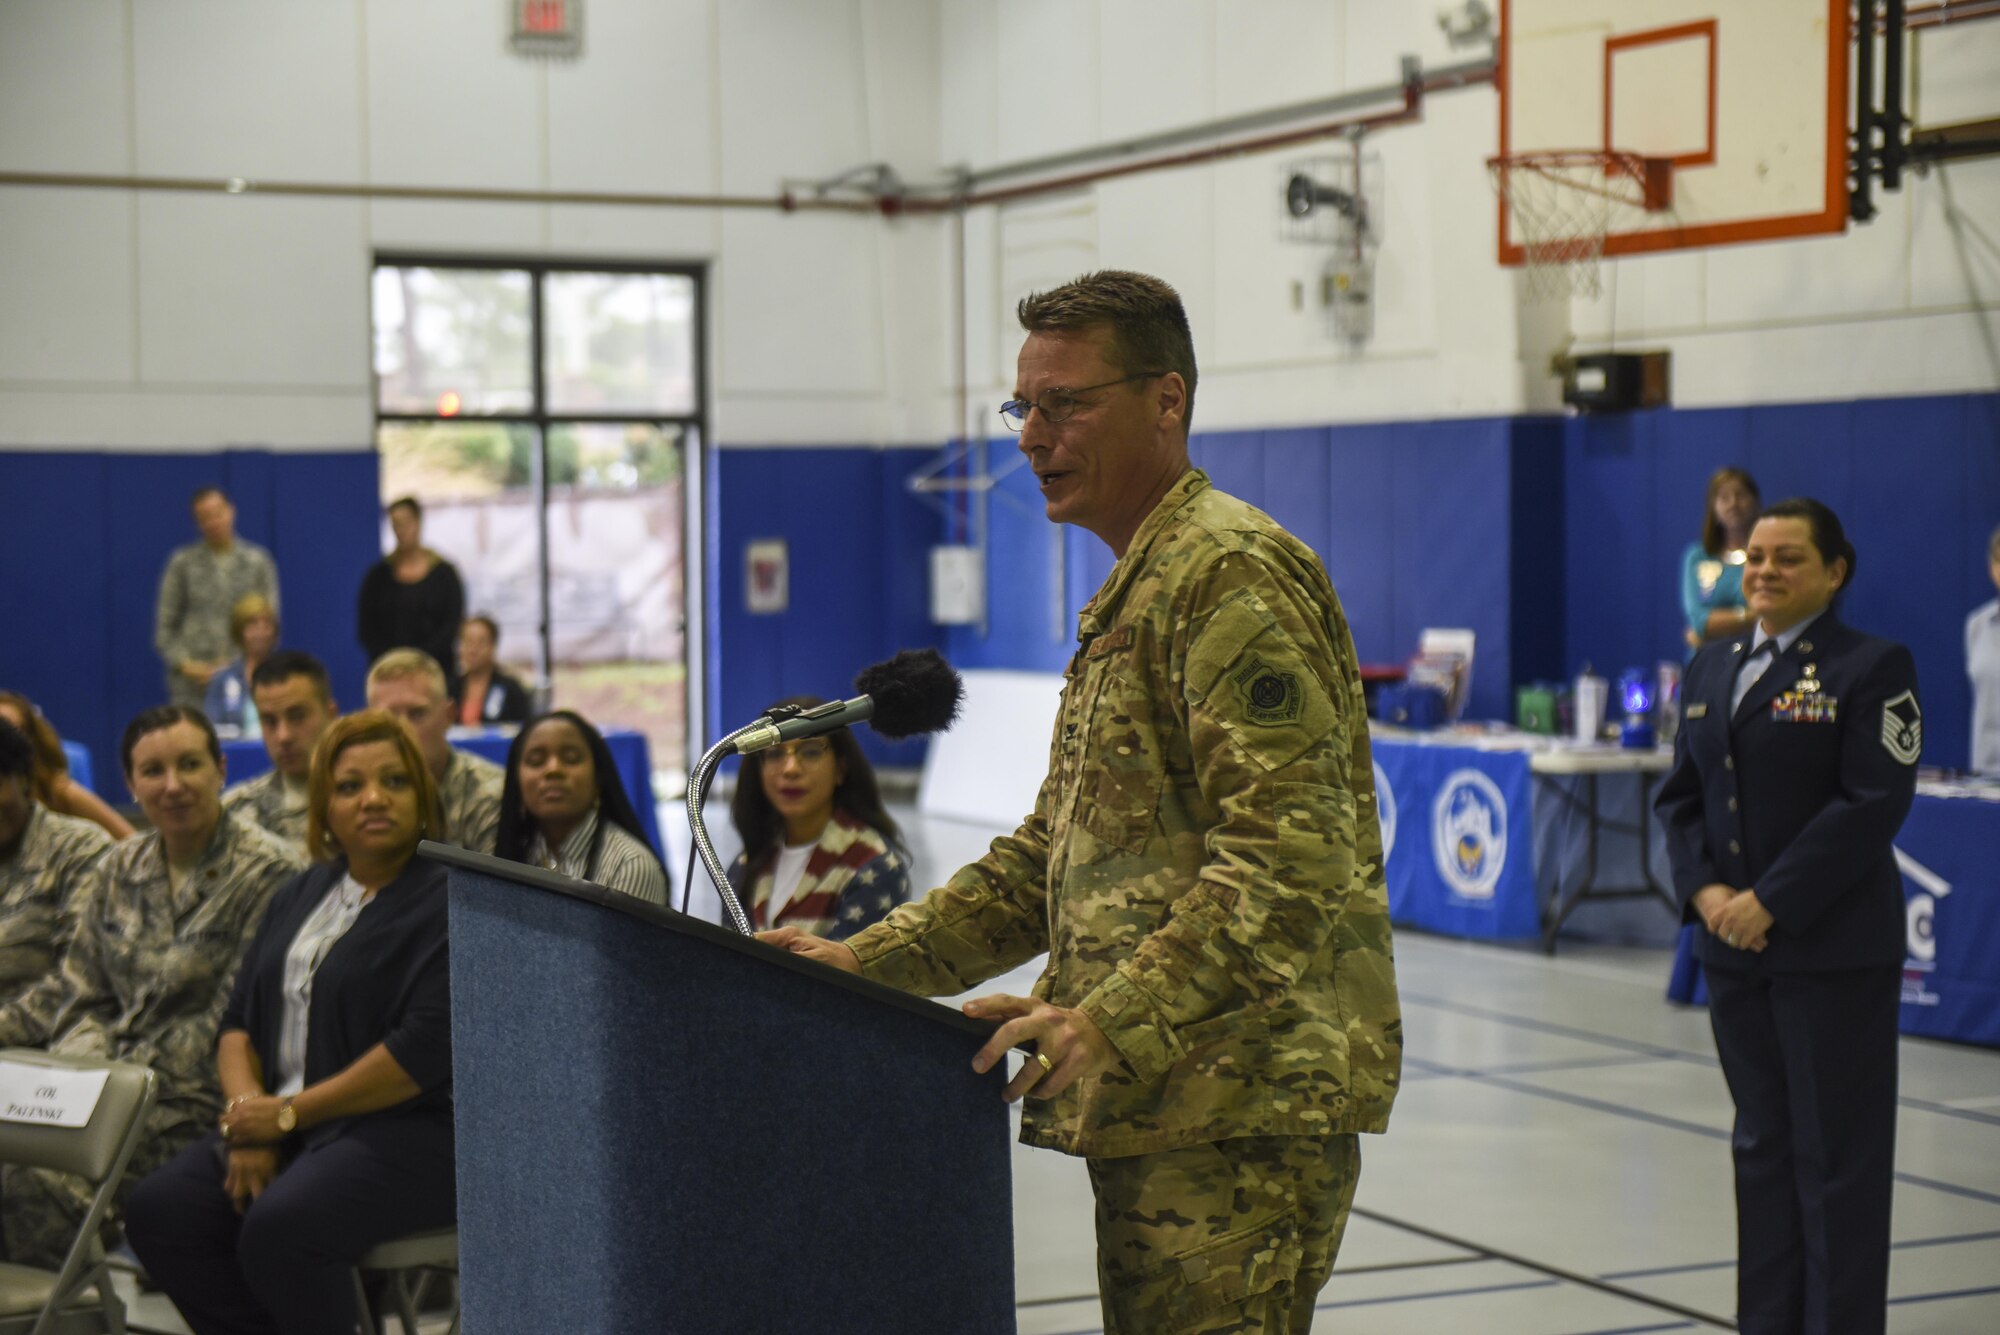 Col. Thomas Palenske, the commander of the 1st Special Operations Wing, gives remarks during a proclamation signing ceremony at the Youth Center, Hurlburt Field, Fla., April 3, 2017. Palenske and his wife, Jeryn, both signed proclamations for Month of the Military Child and Child Abuse Prevention. (U.S. Air Force photo by Senior Airman Jeff Parkinson)